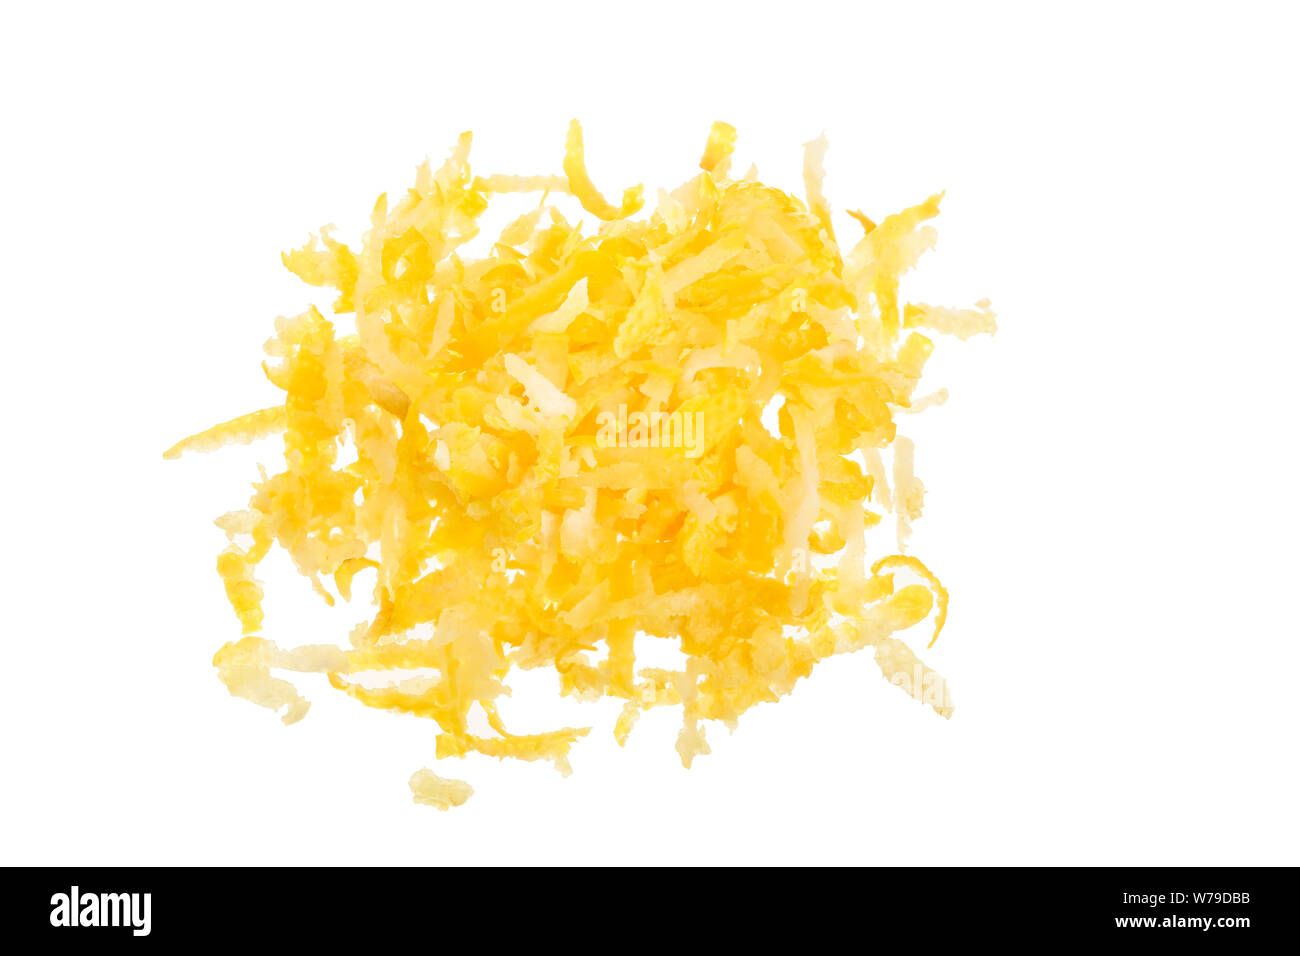 Lemon peel or zest isolated on white background. Healthy food. Top view. Flat lay Stock Photo